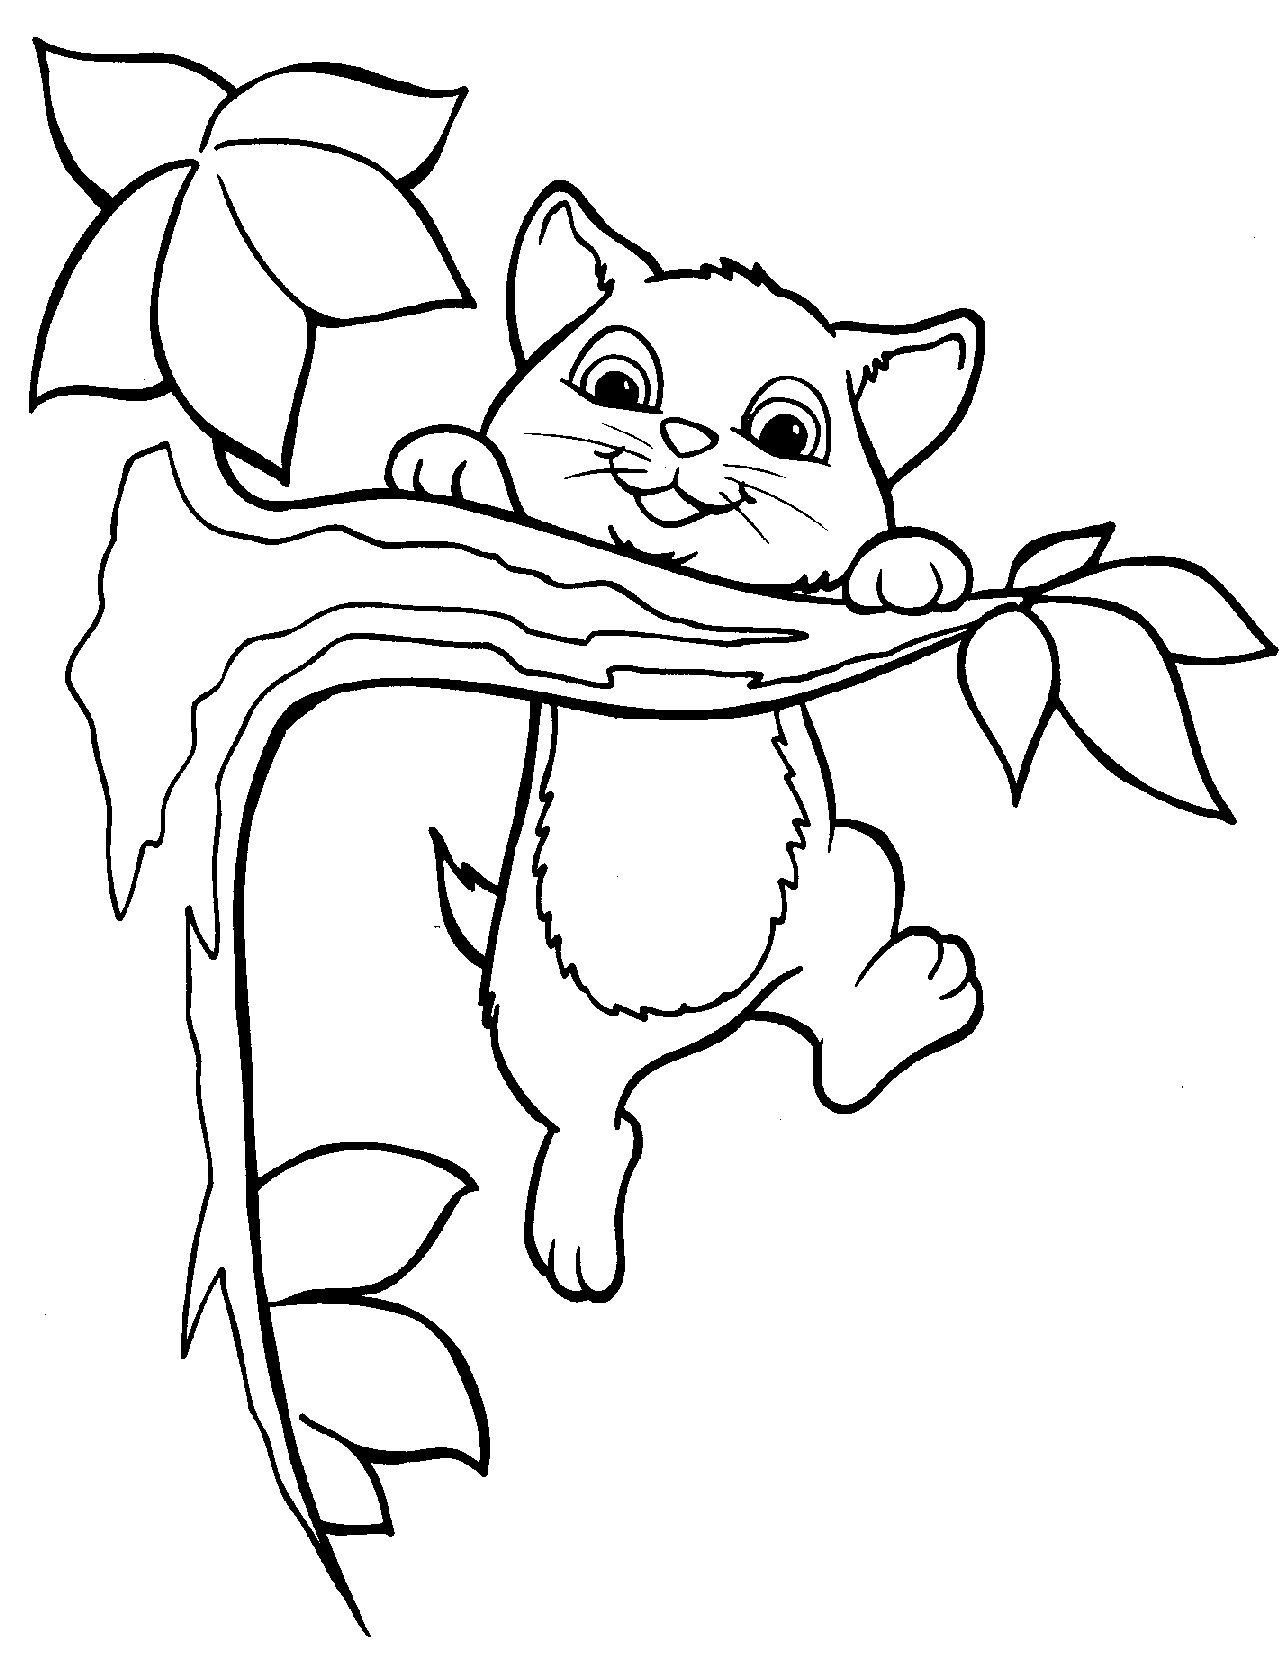 kitten color page kitten coloring pages getcoloringpagescom kitten color page 